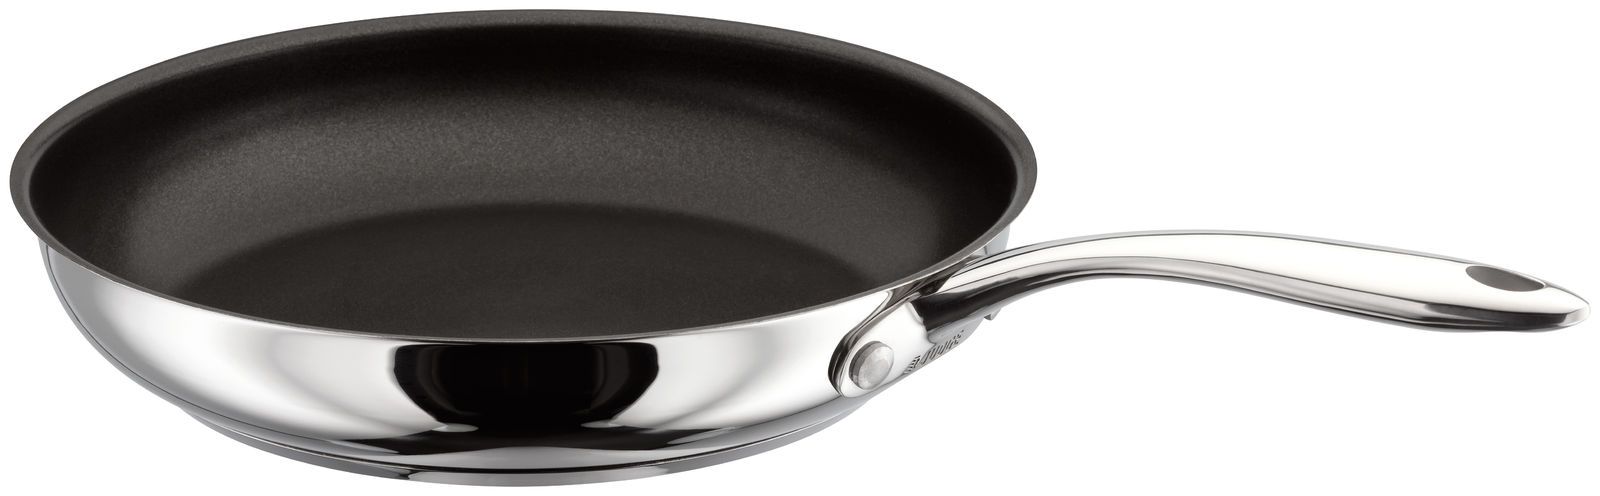 Judge-Classic-Stainless-Steel-Non-Stick-26cm-Frying-Pan